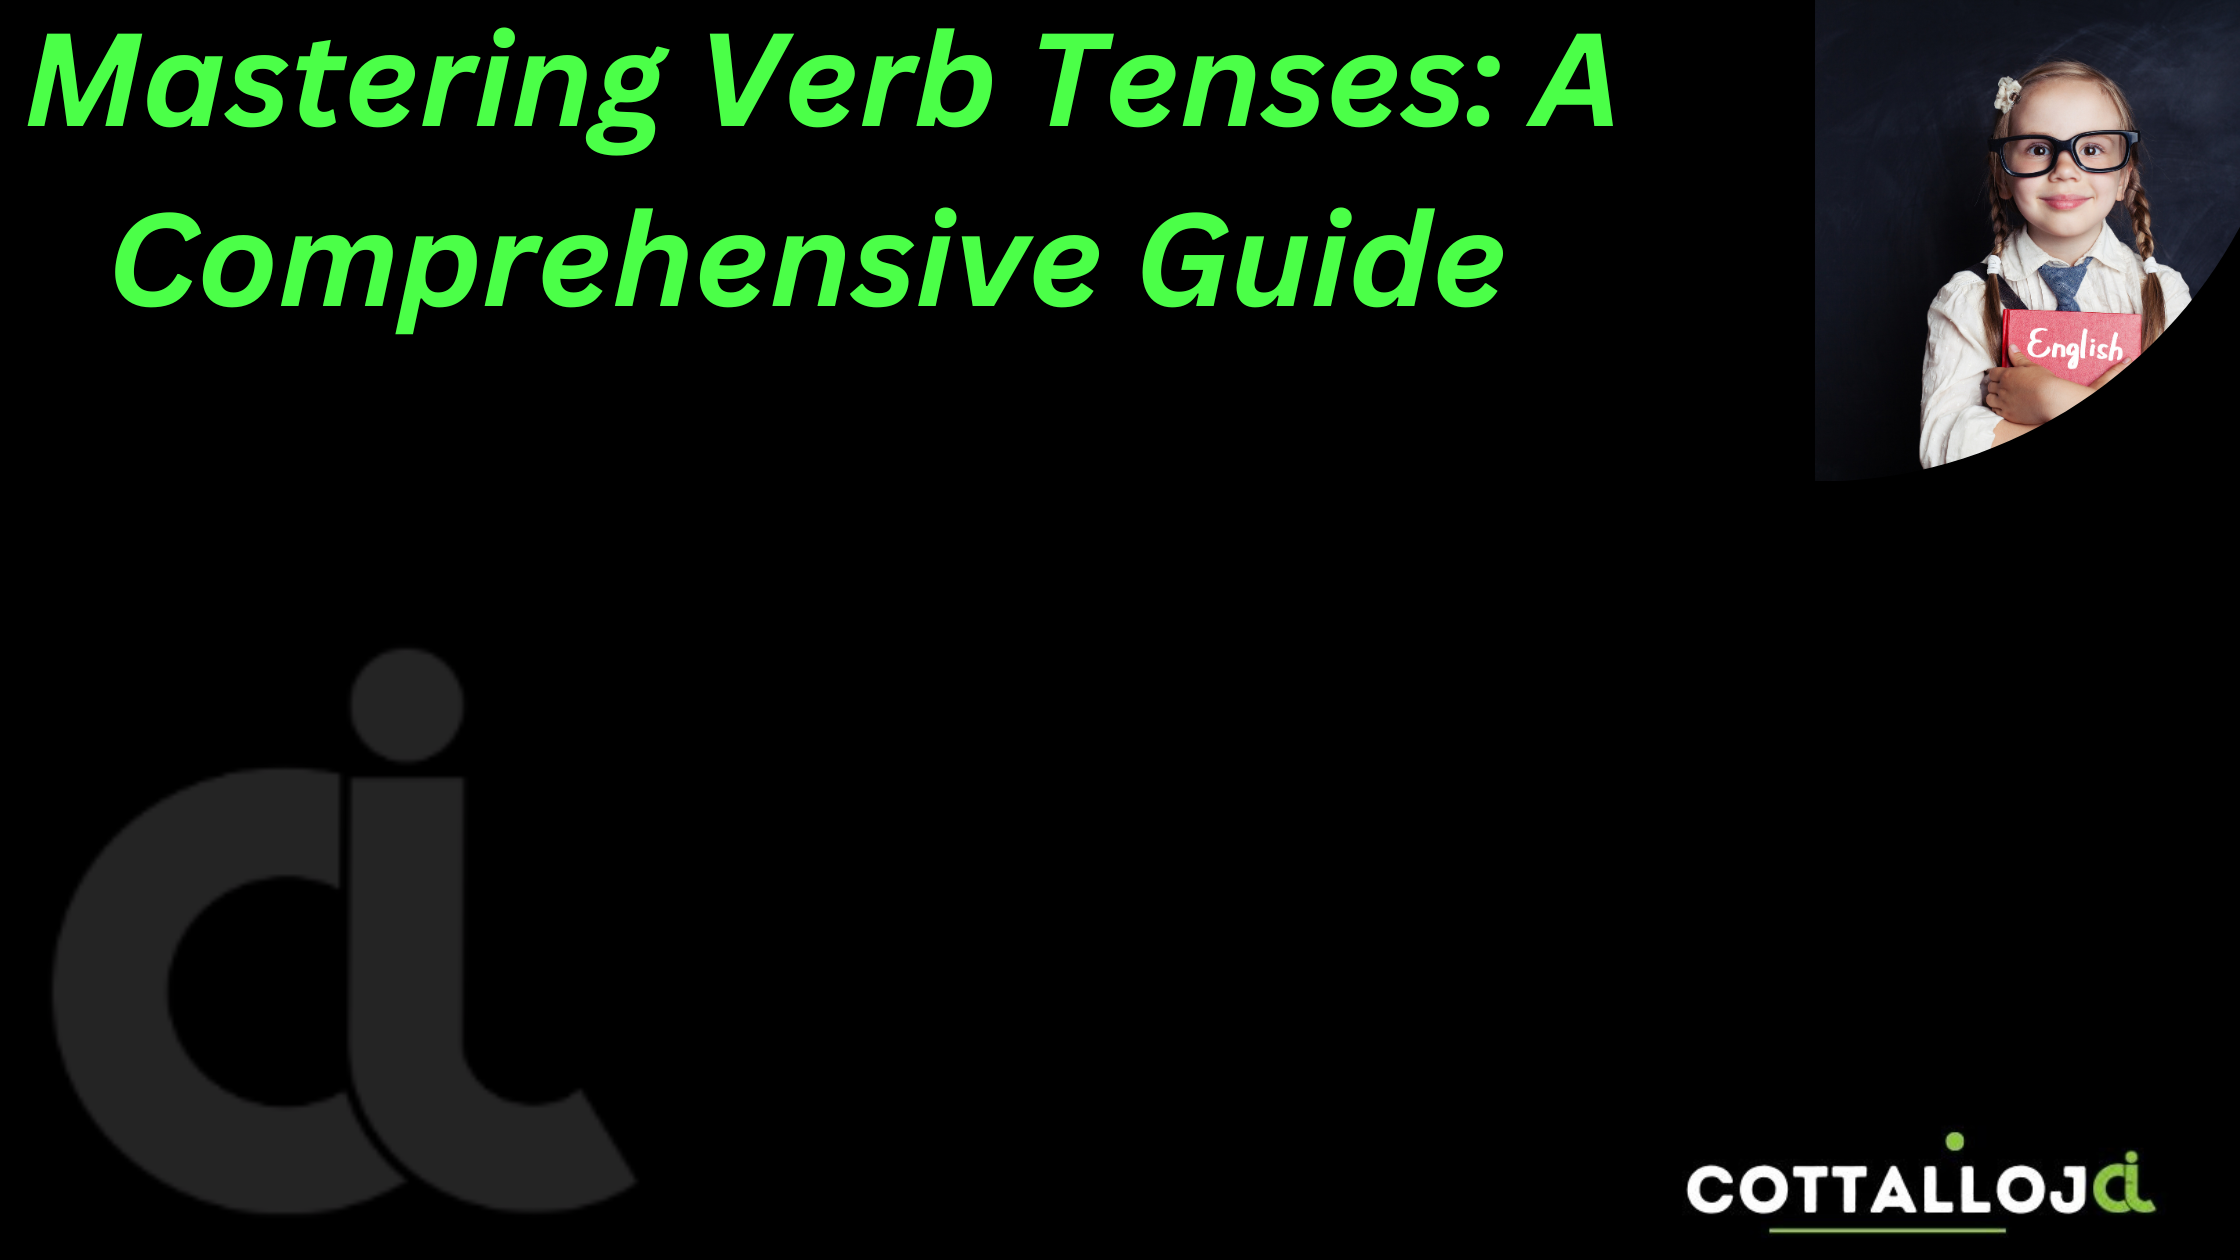 Mastering Verb Tenses: A Comprehensive Guide